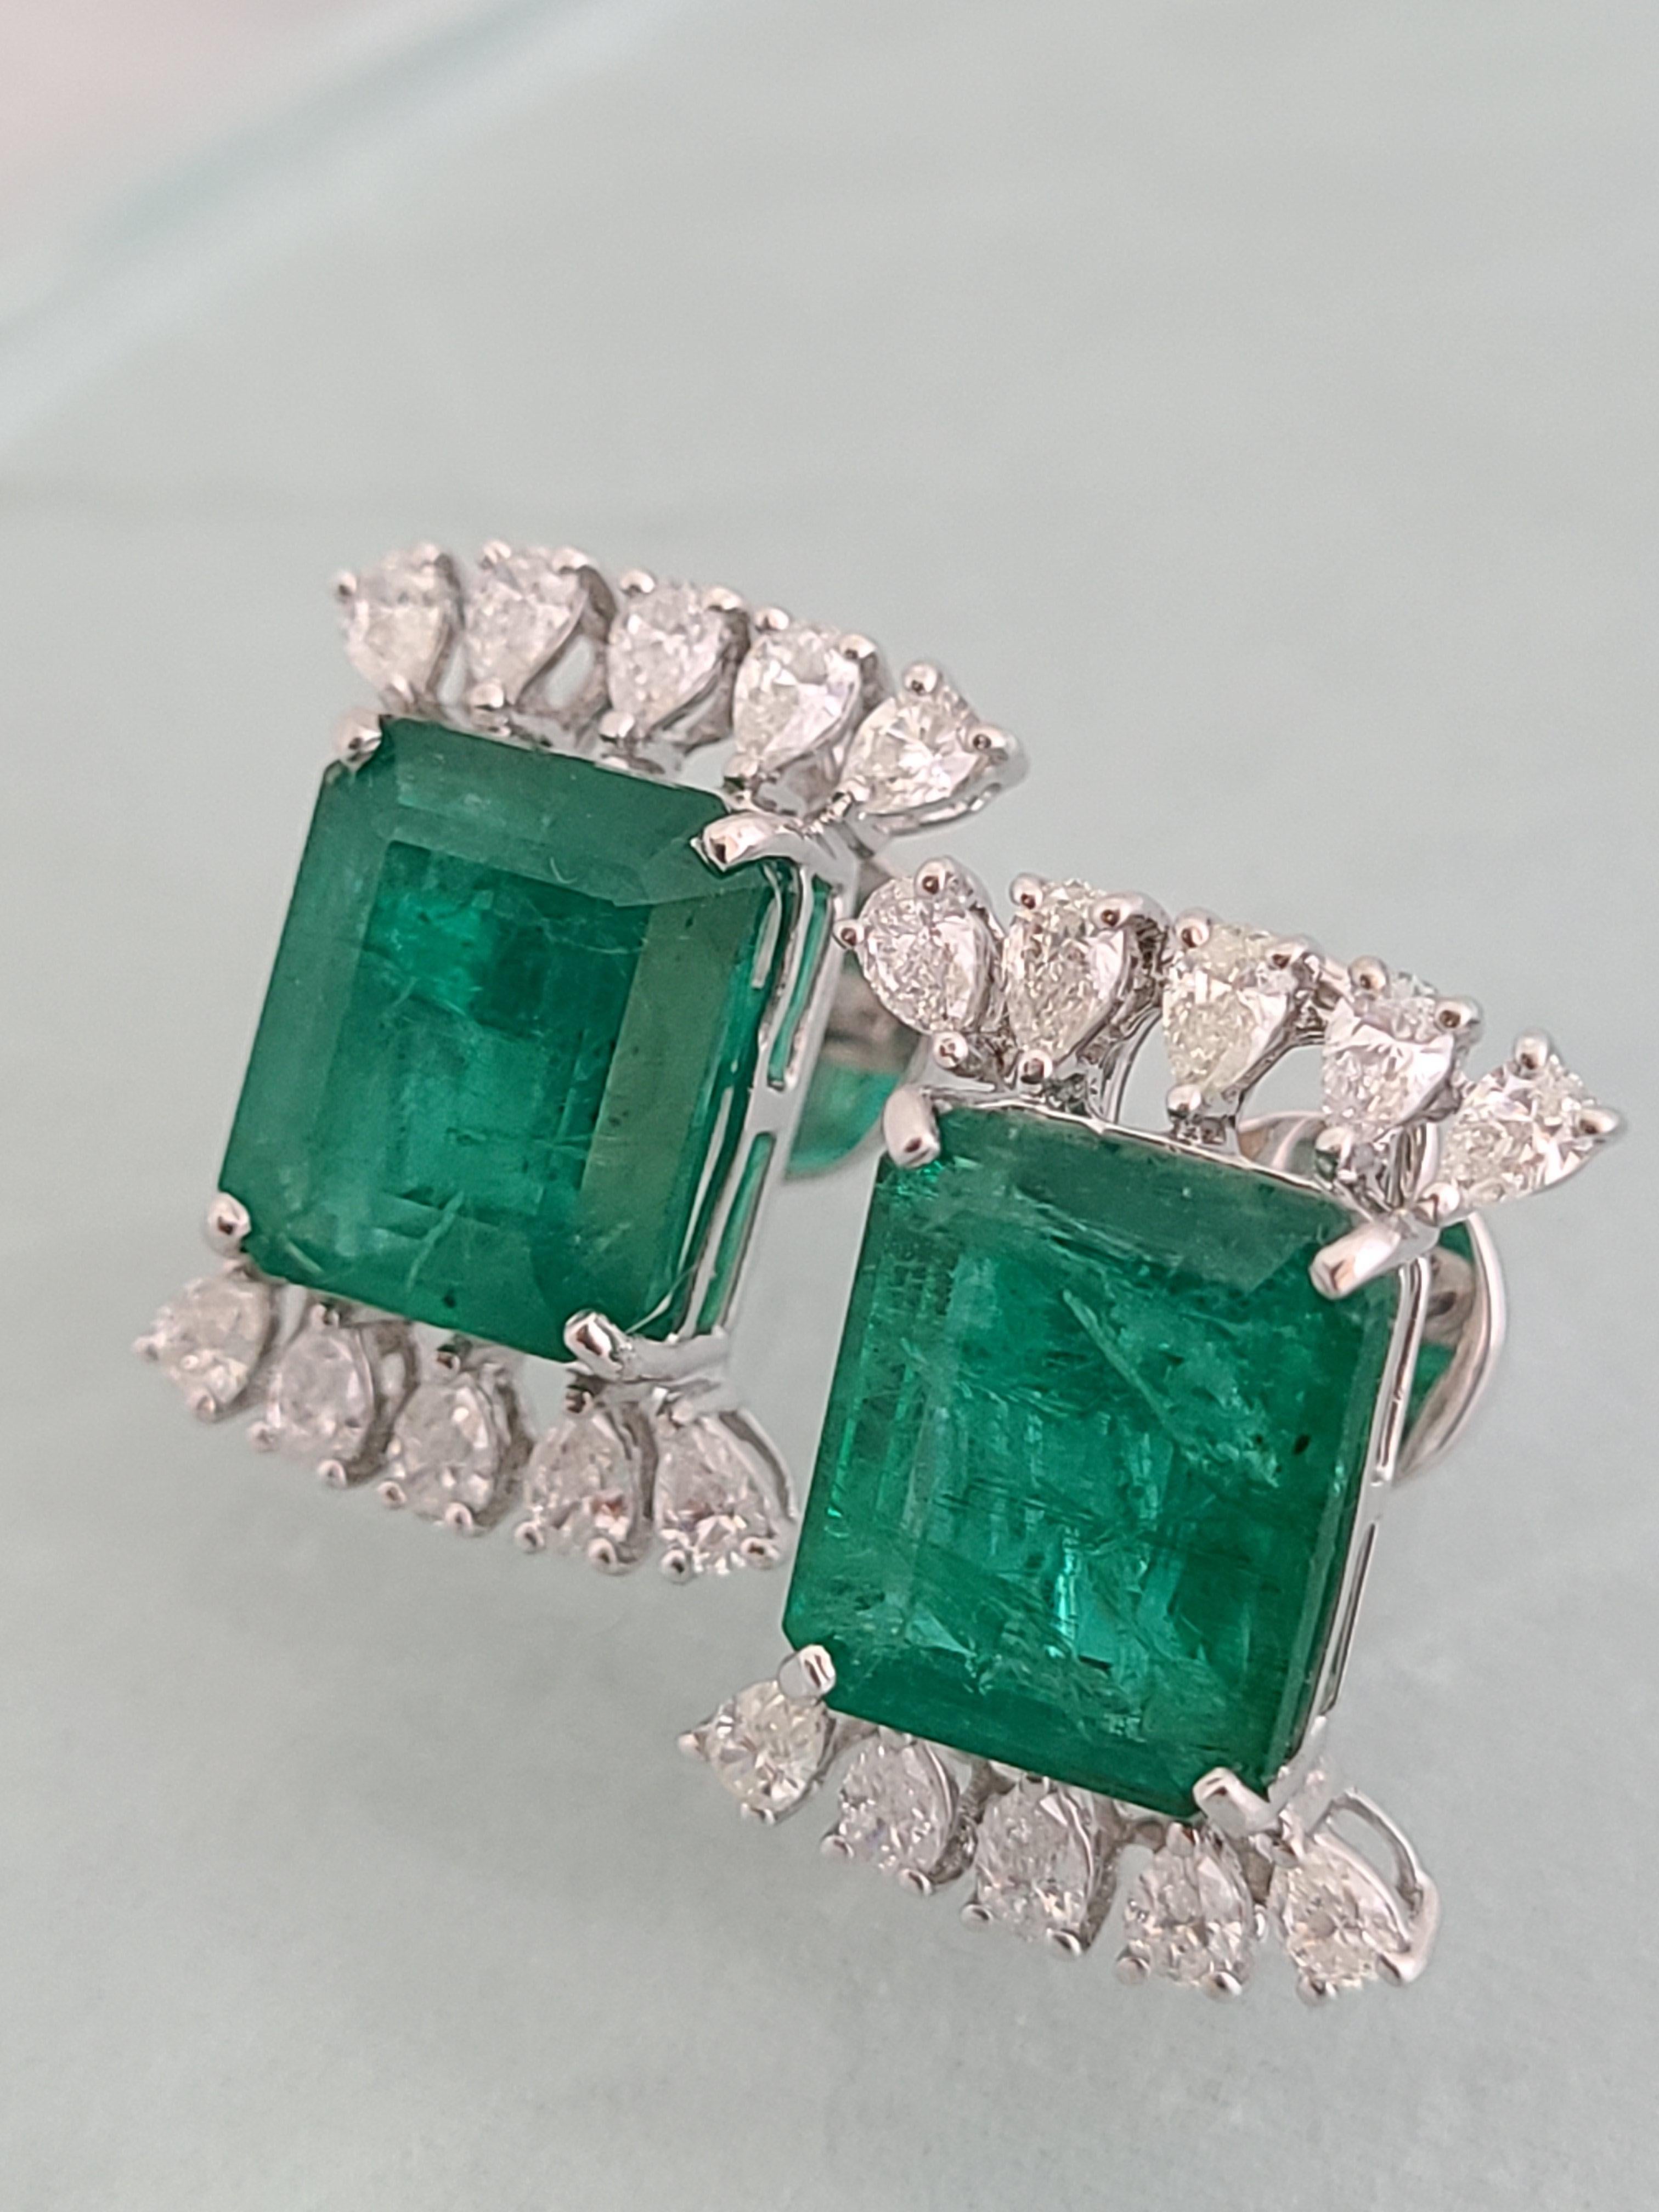 A pair of beautiful and stylish natural emerald studs in 18k white gold with diamonds. The emerald are natural from Zambia and weight is 14.24 carats with a diamond weight of 1.81 carats. The earrings dimensions in cm 2.2 x 1.6 x 2.2 (LXWXD).